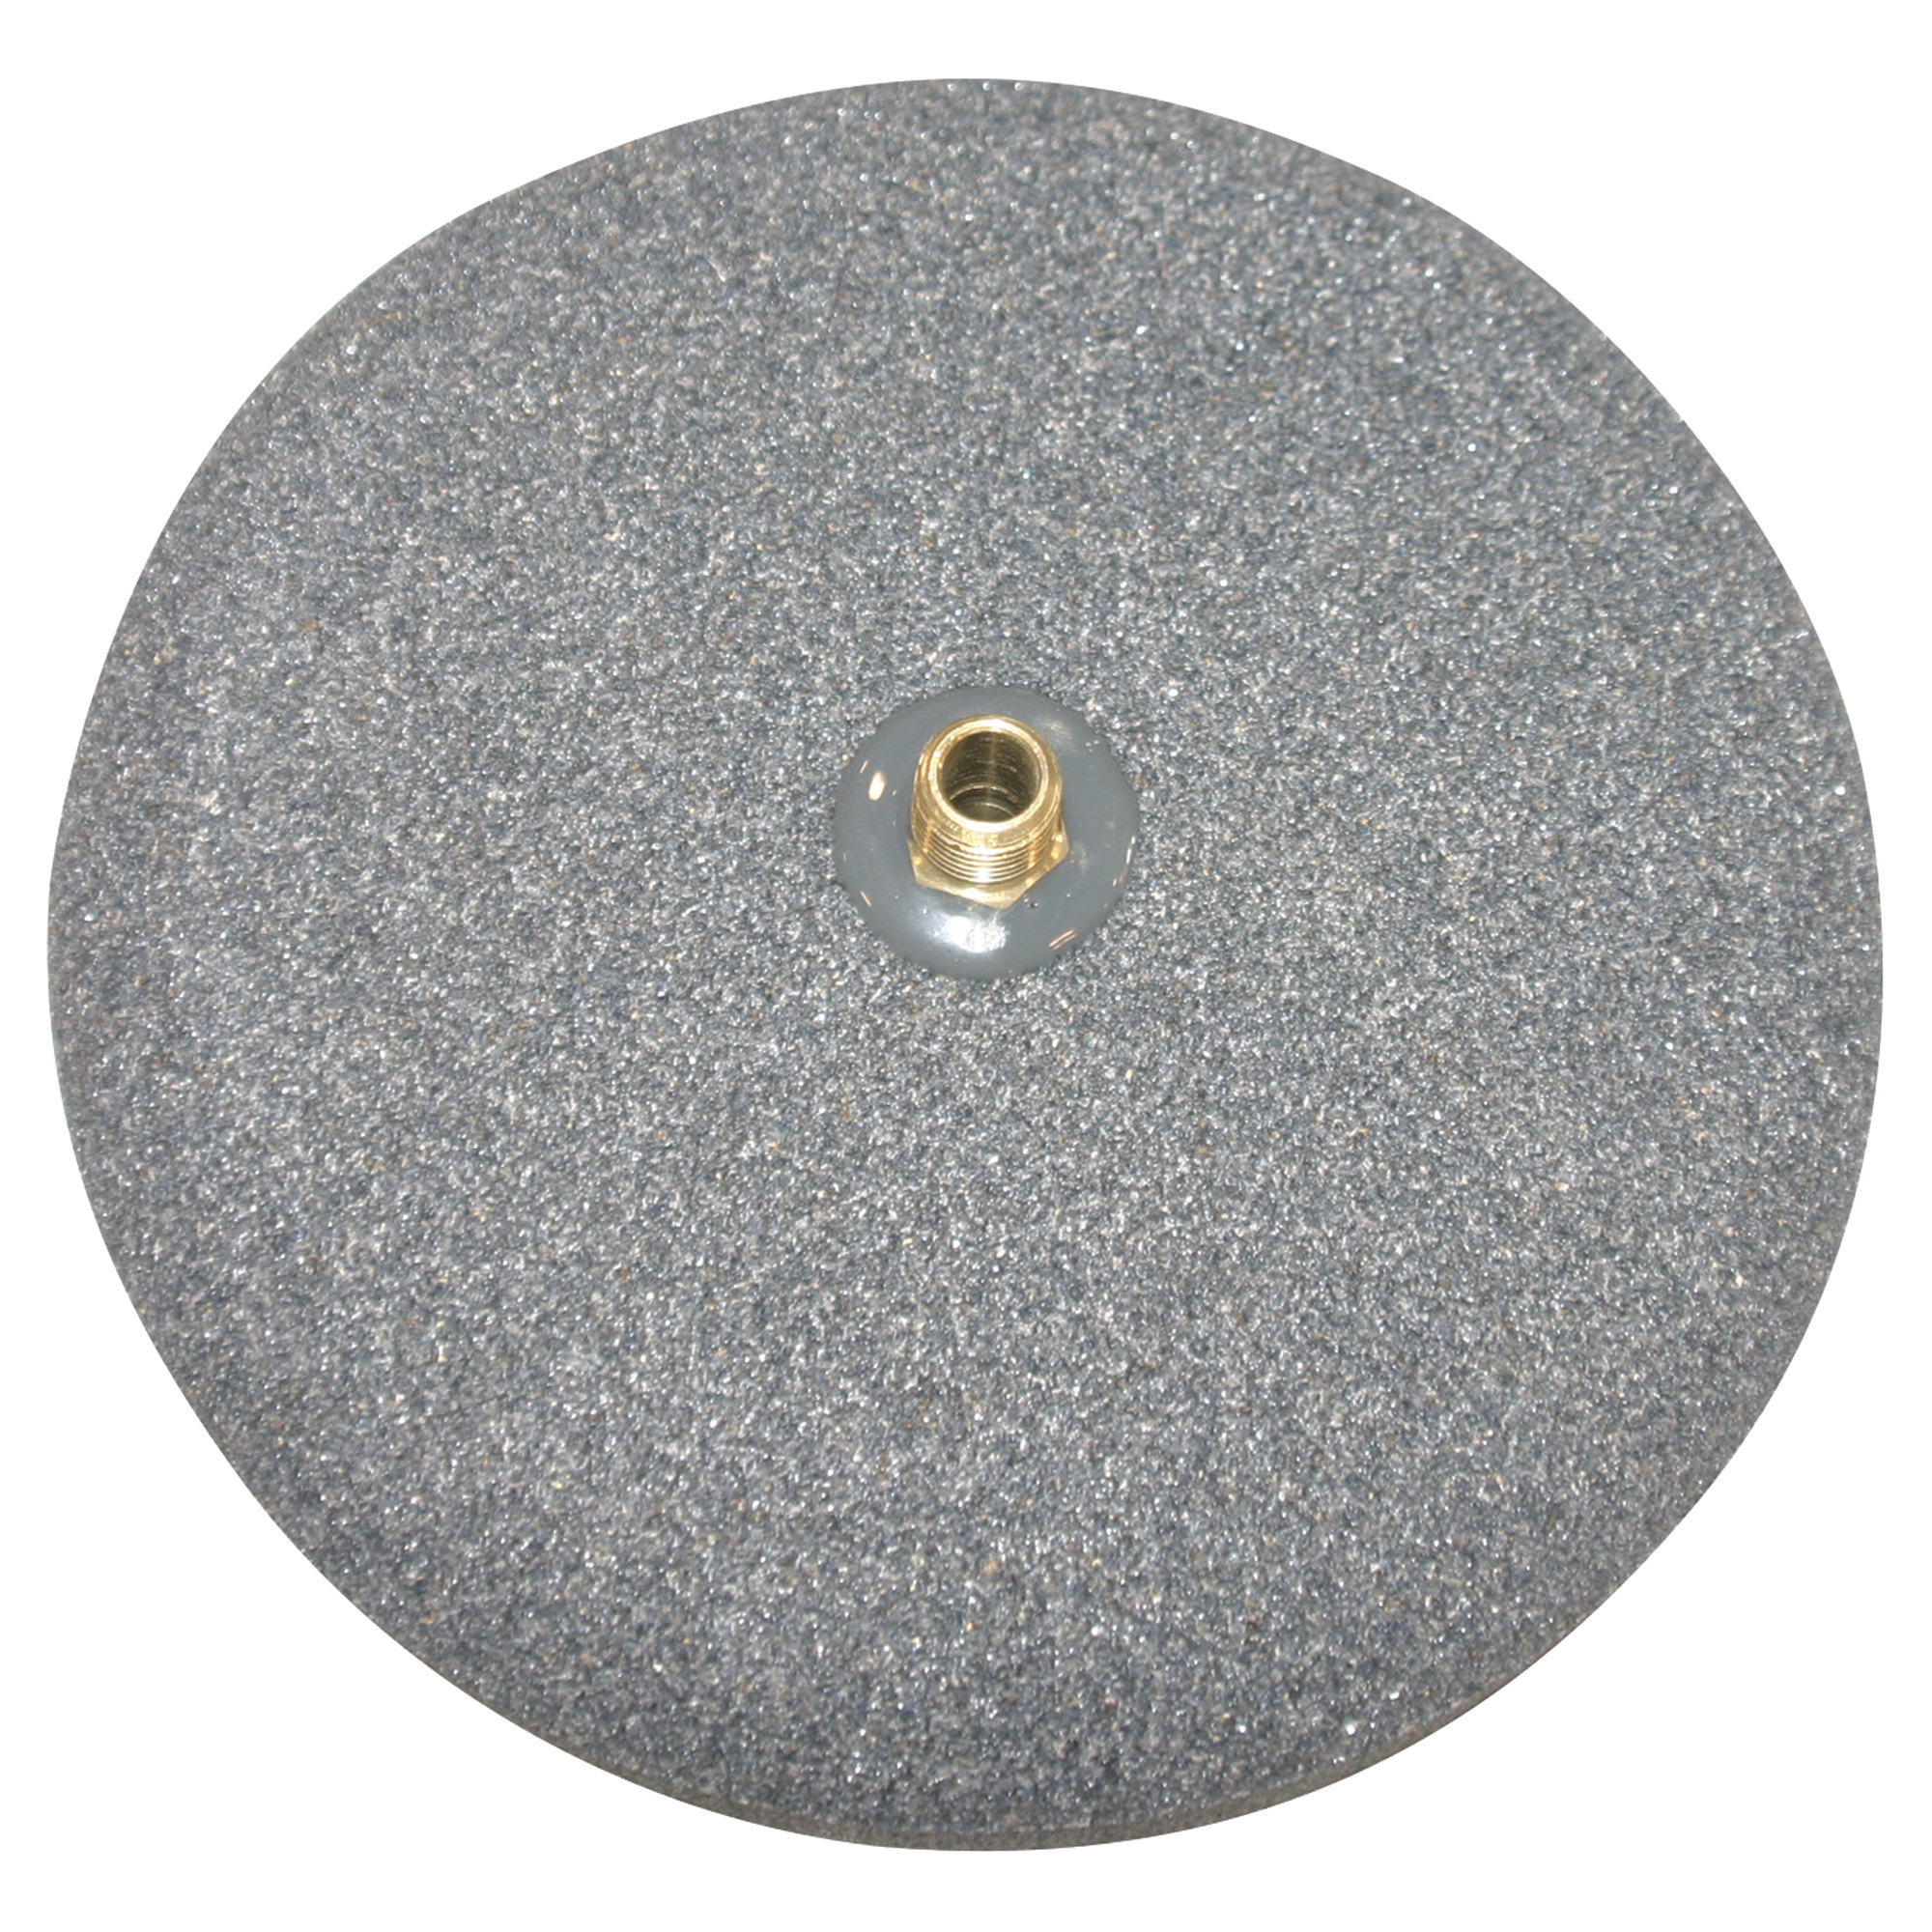 Outdoor Water Solutions Diffuser Airstone, 7Inch, Model ARS0026